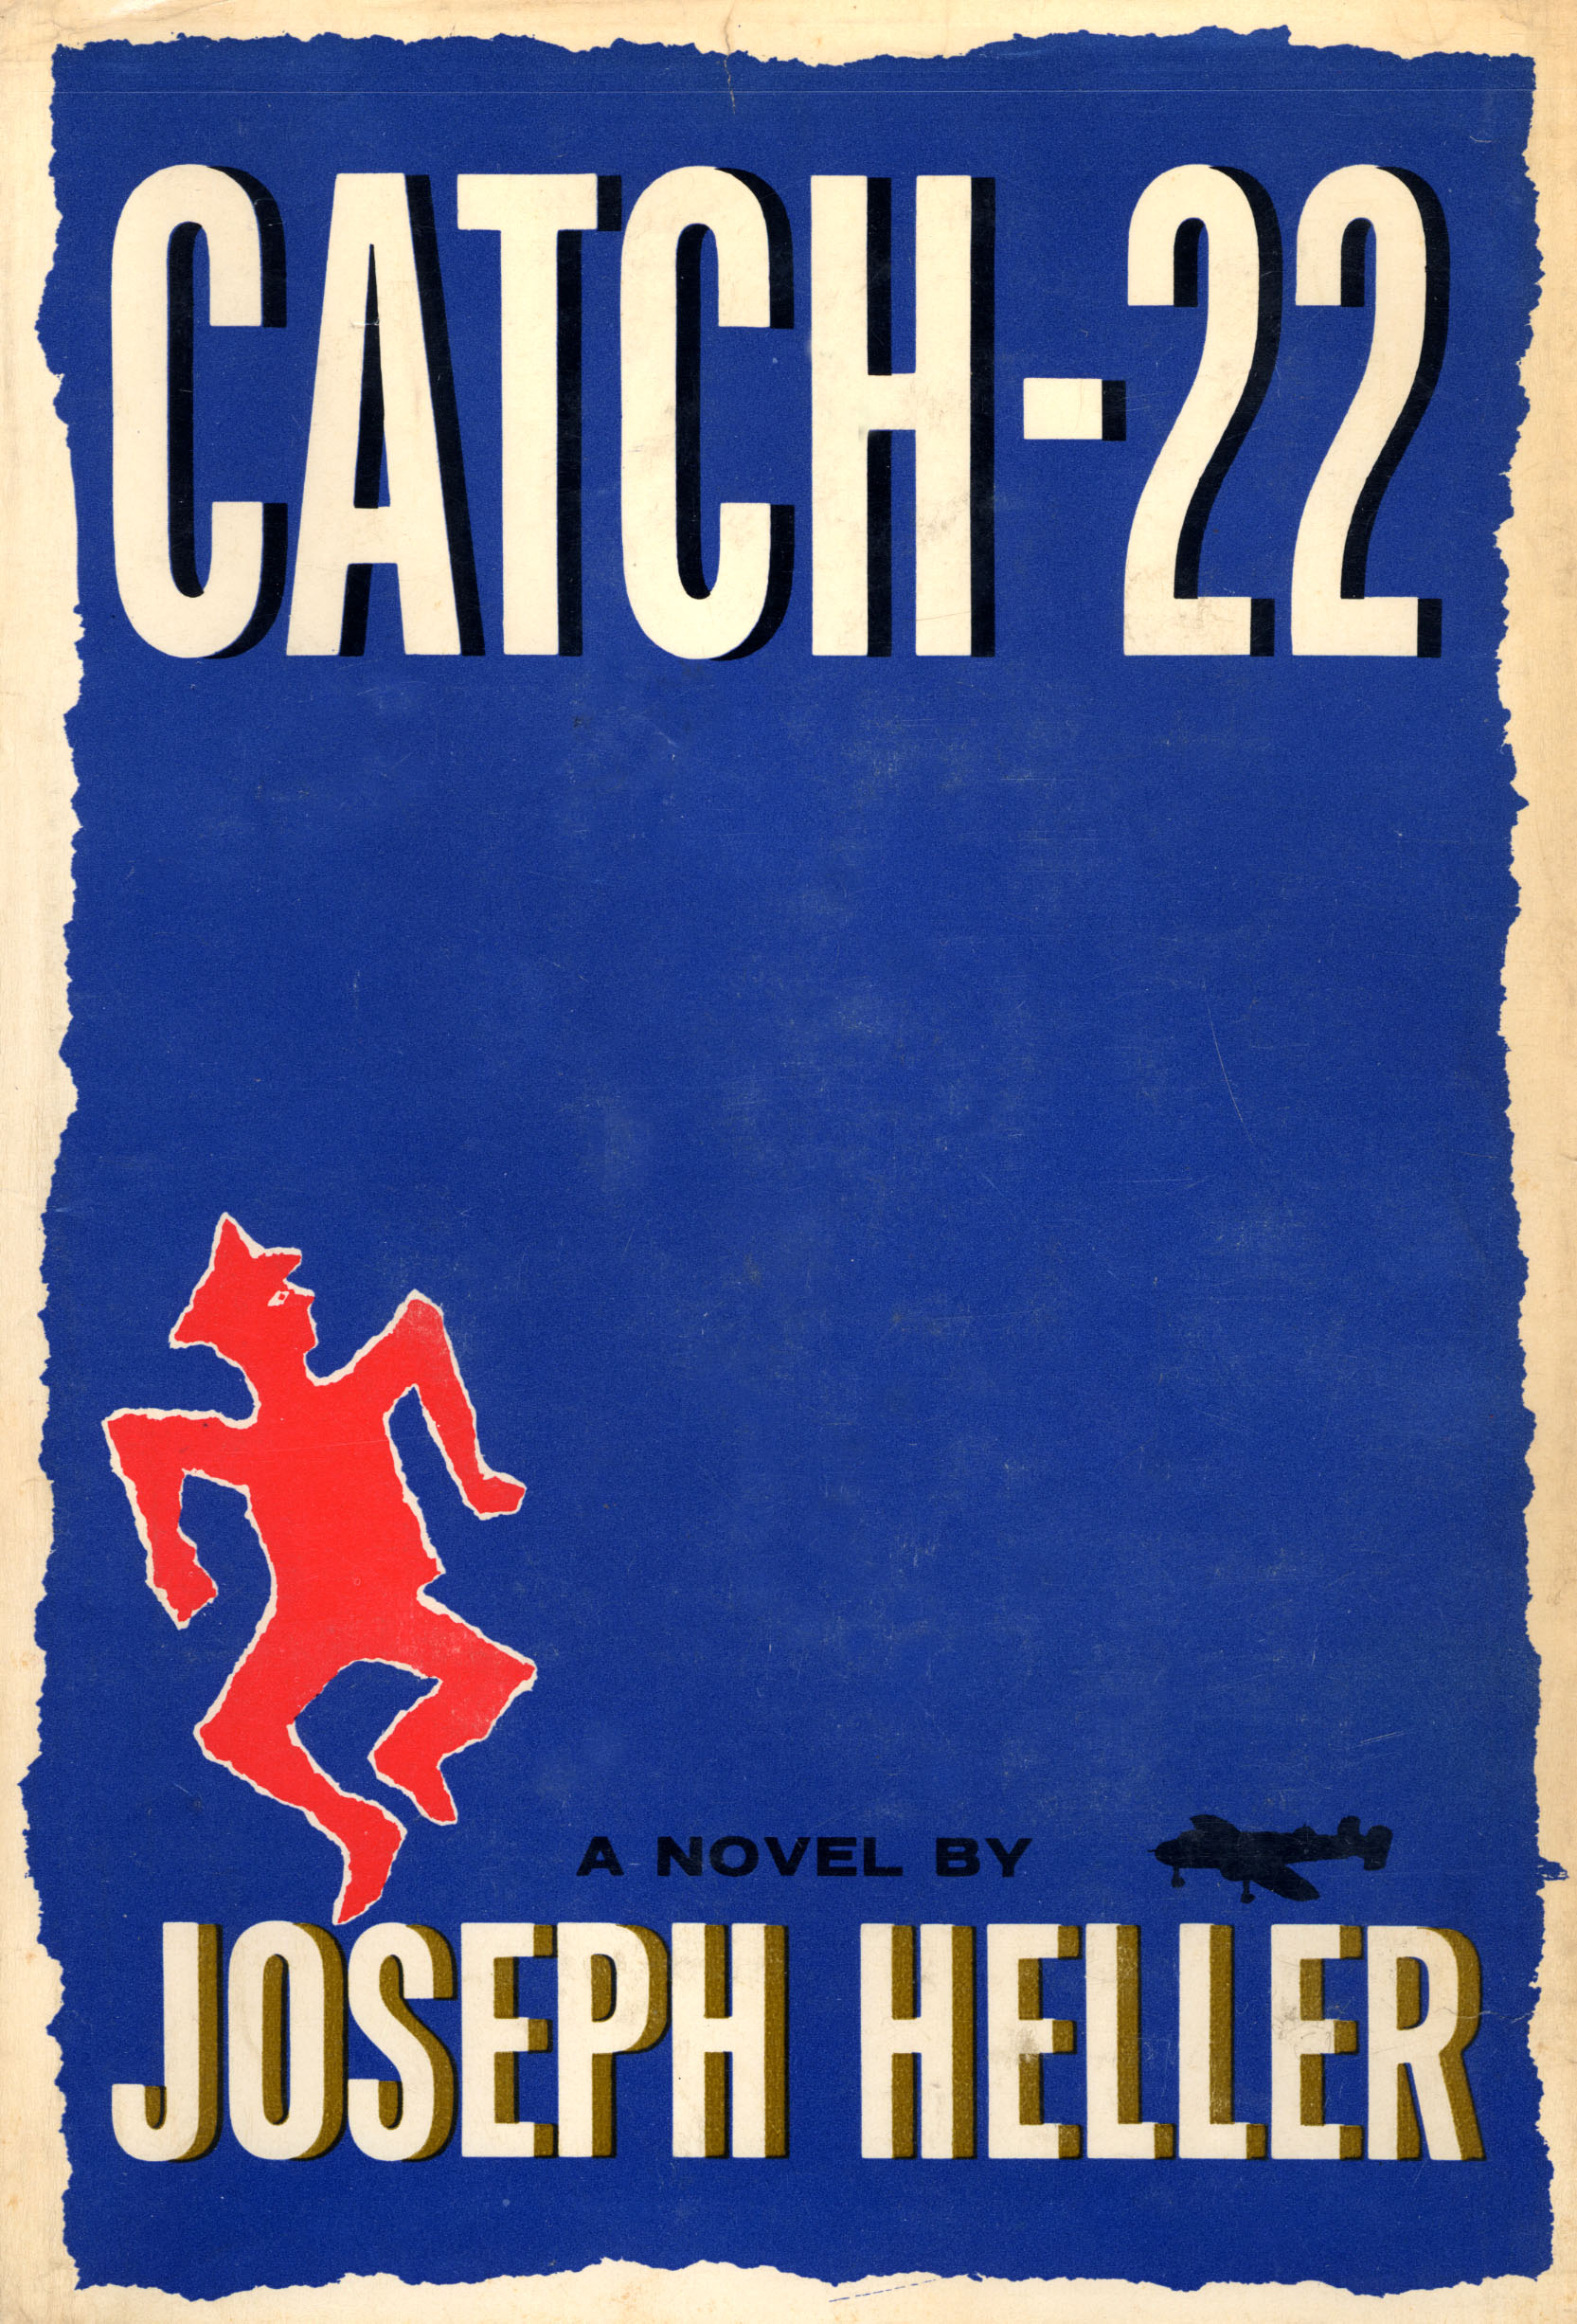 book review of catch 22